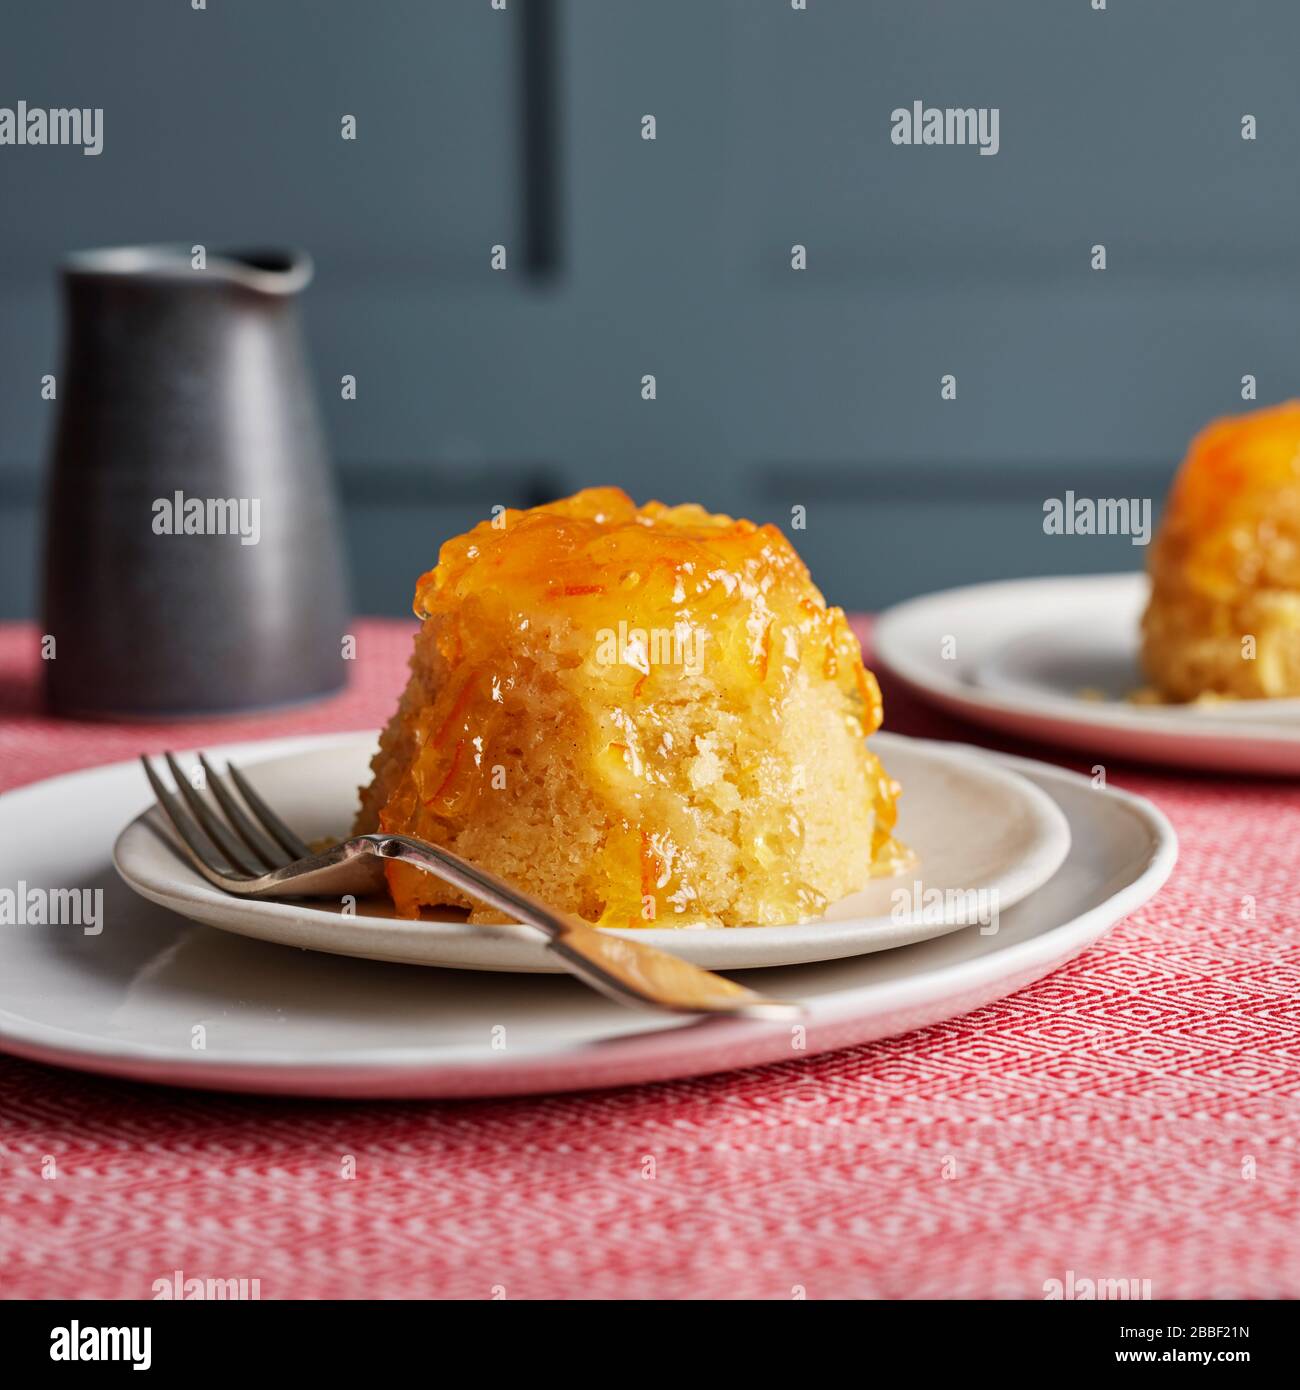 Individual steam sponge puddings marmalade syrup red table top white plates fork gooey sticky dark panelling Stock Photo